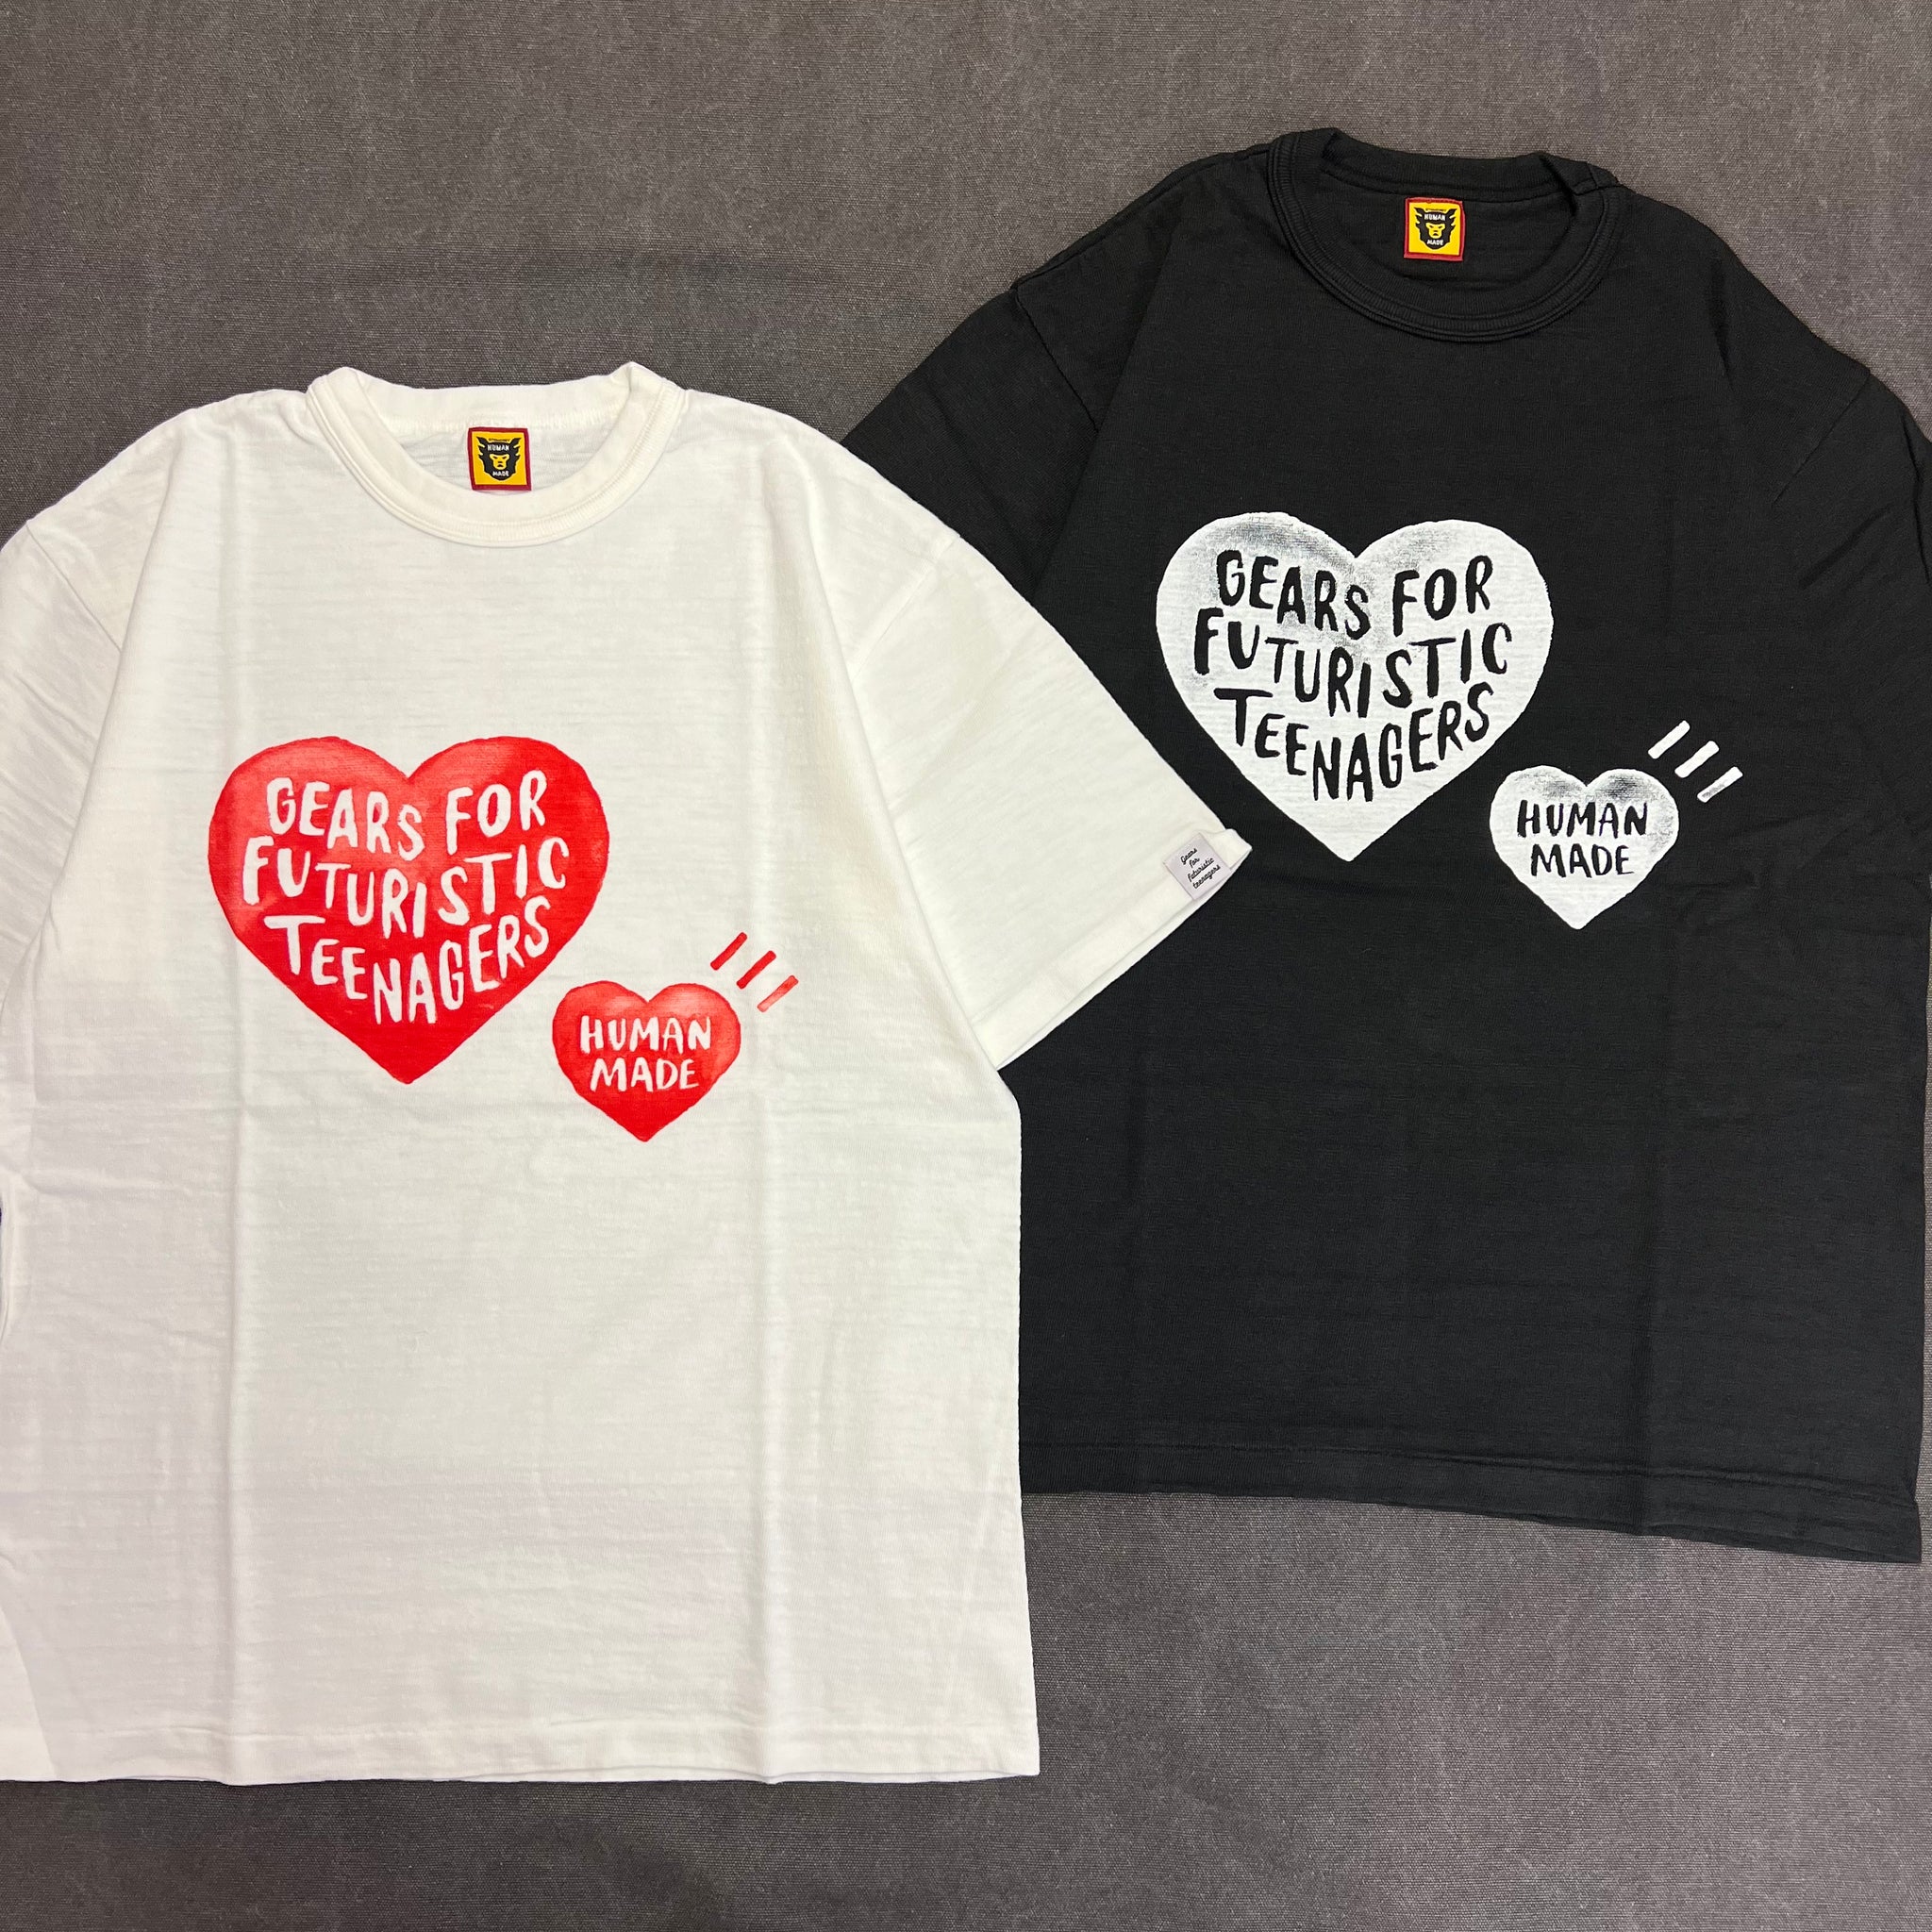 HUMAN MADE GRAPHIC T-SHIRT #4 – Trade Point_HK